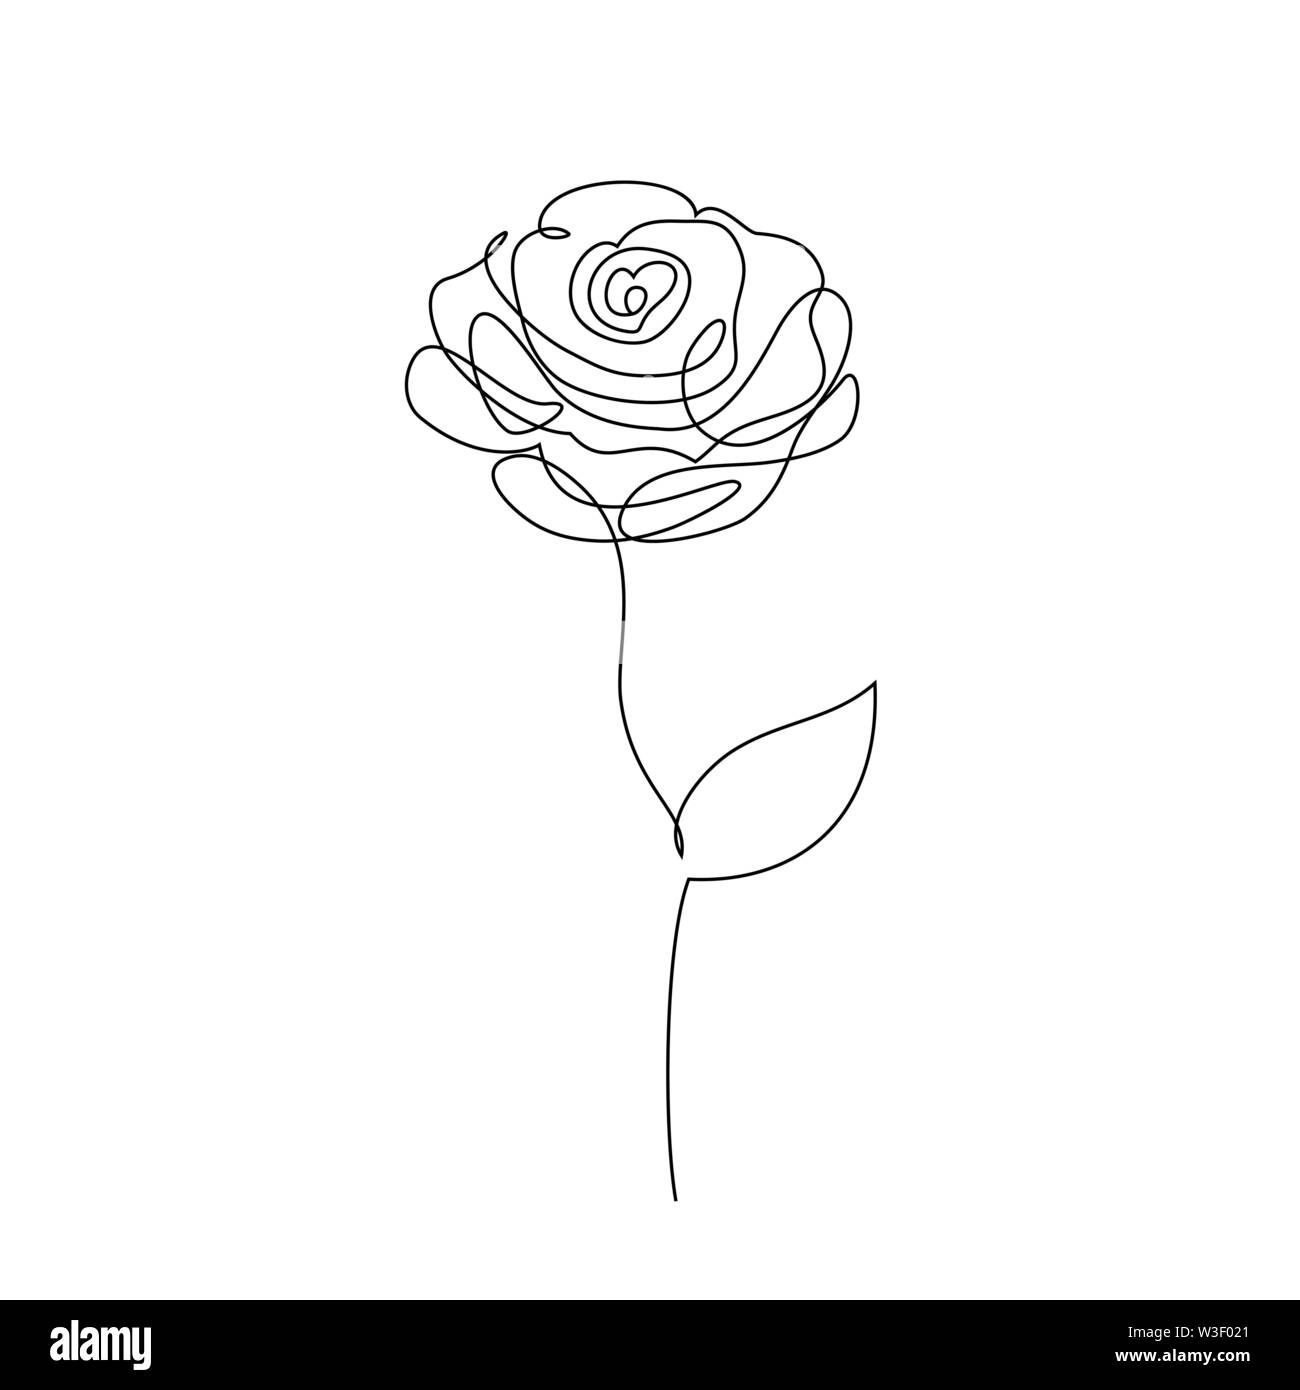 Rose flower on white background. One line drawing style ...